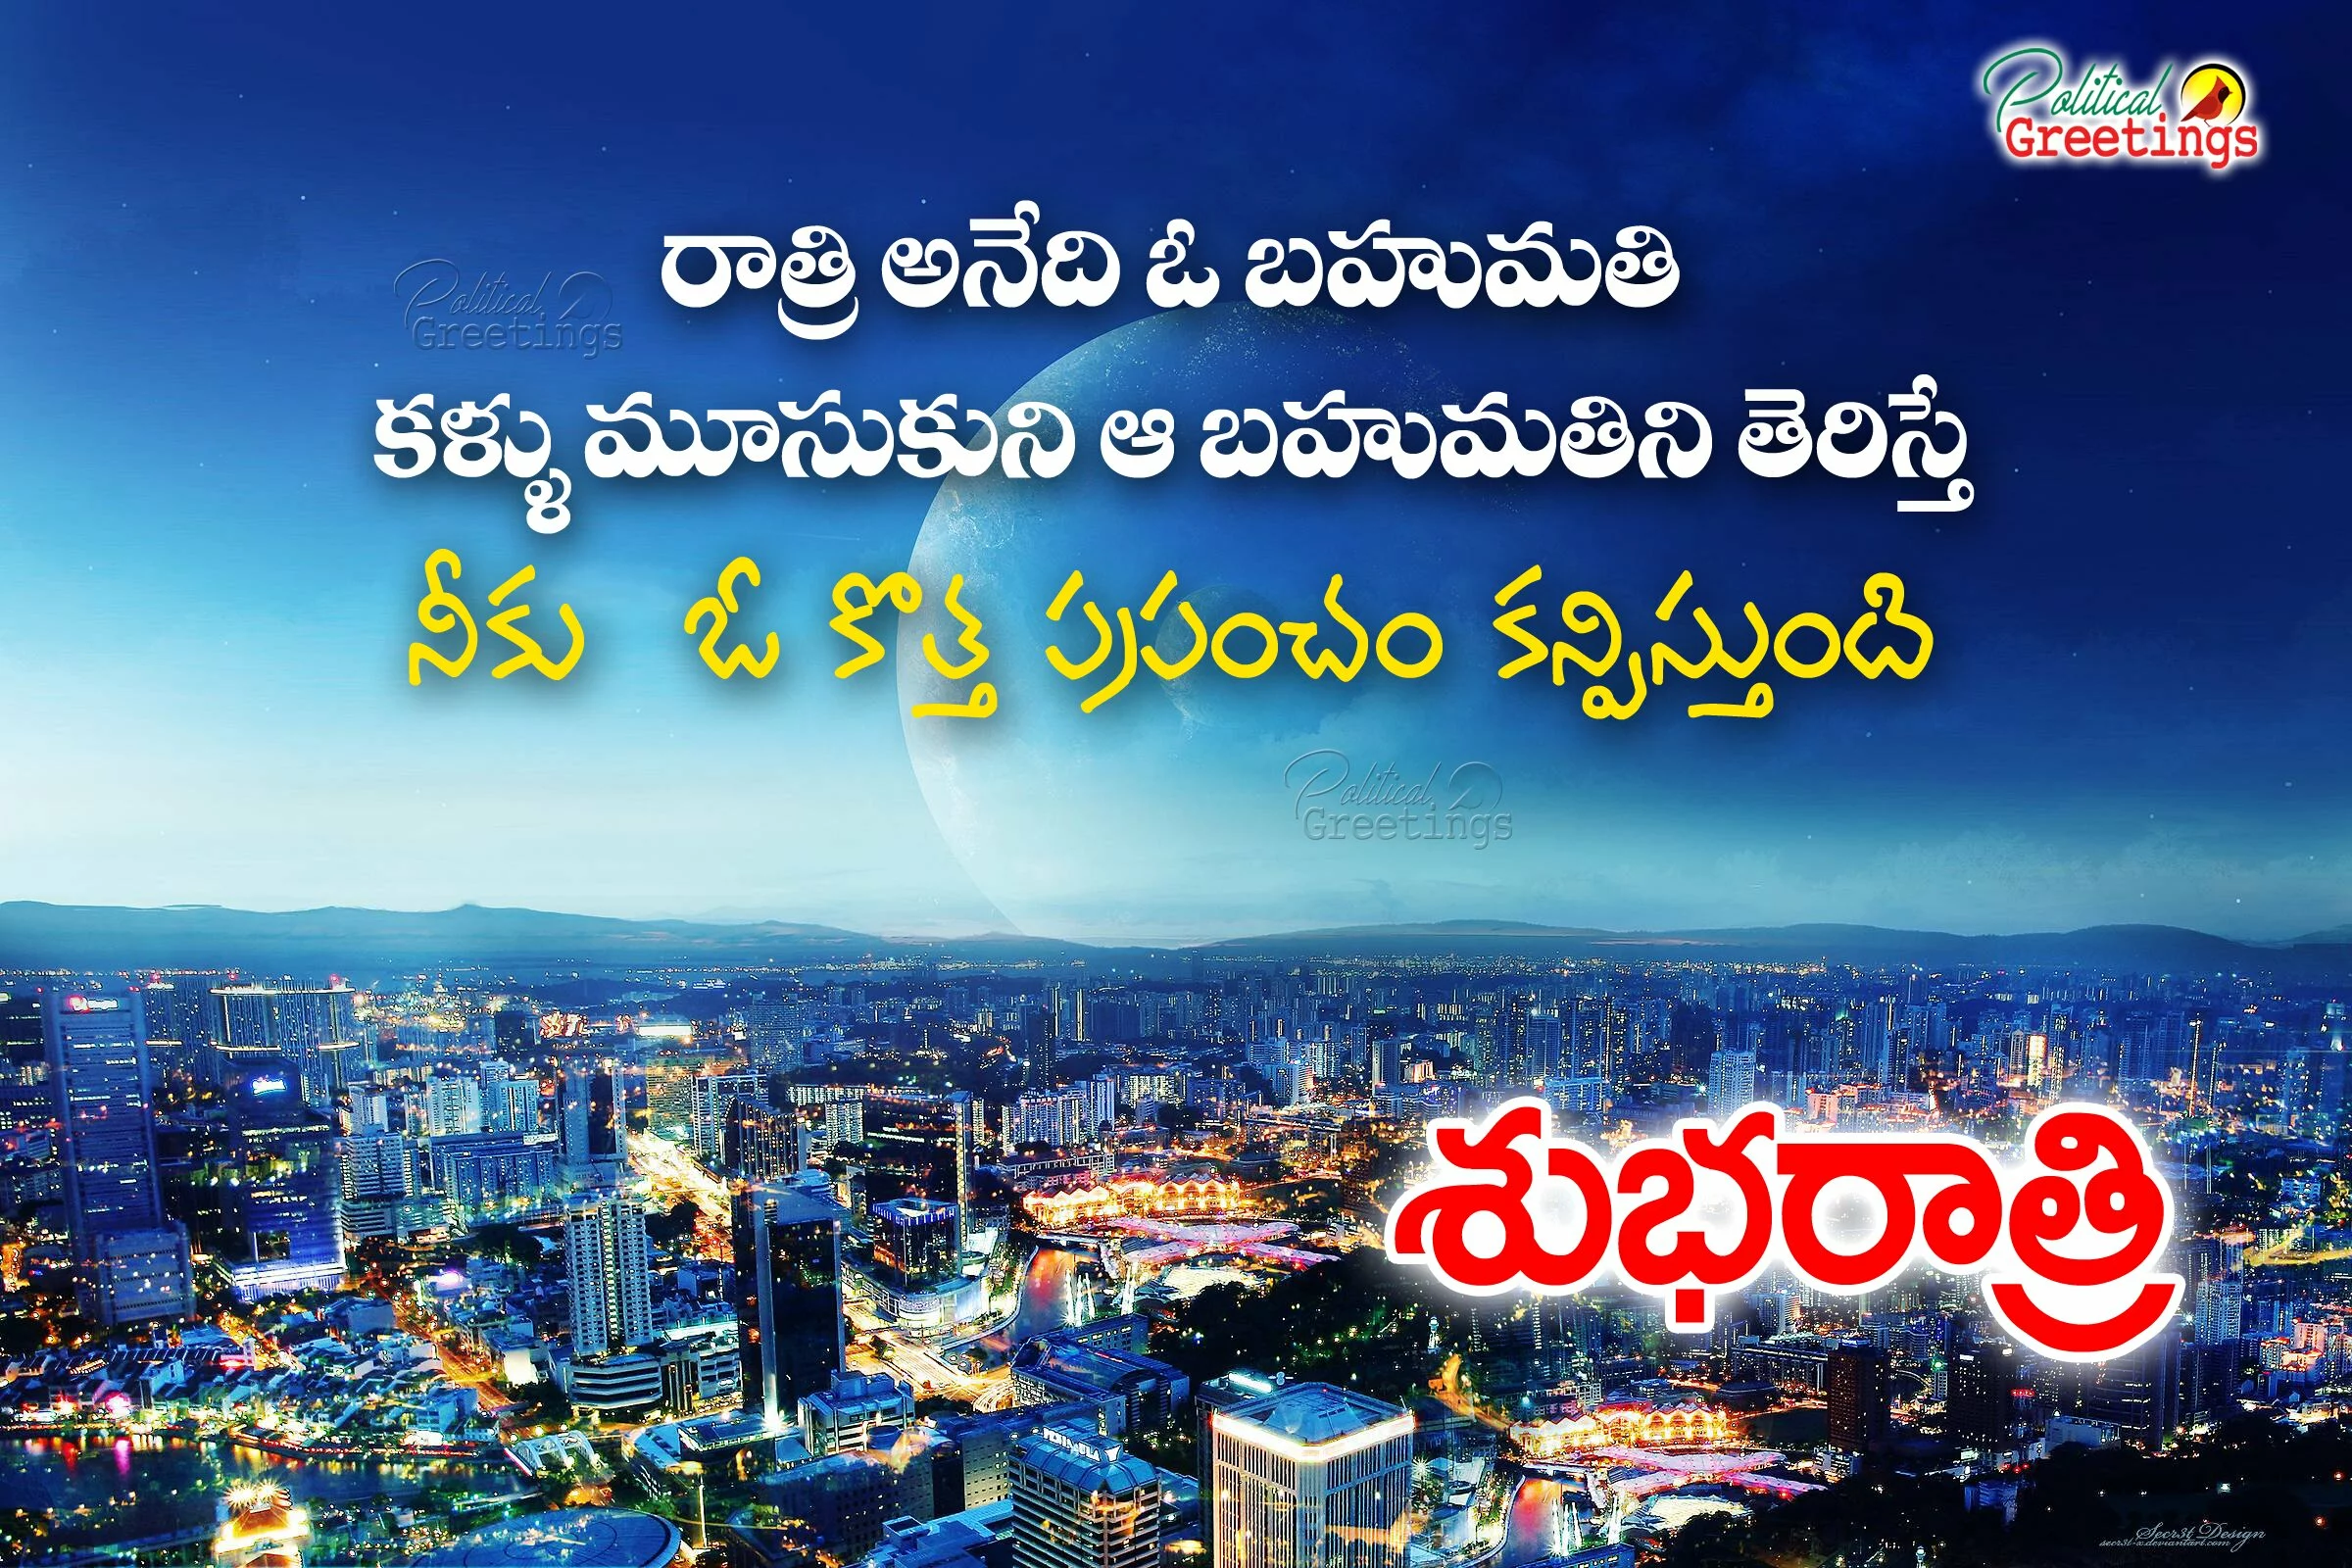 Best Telugu Good Night Wishes Quotes Messages2